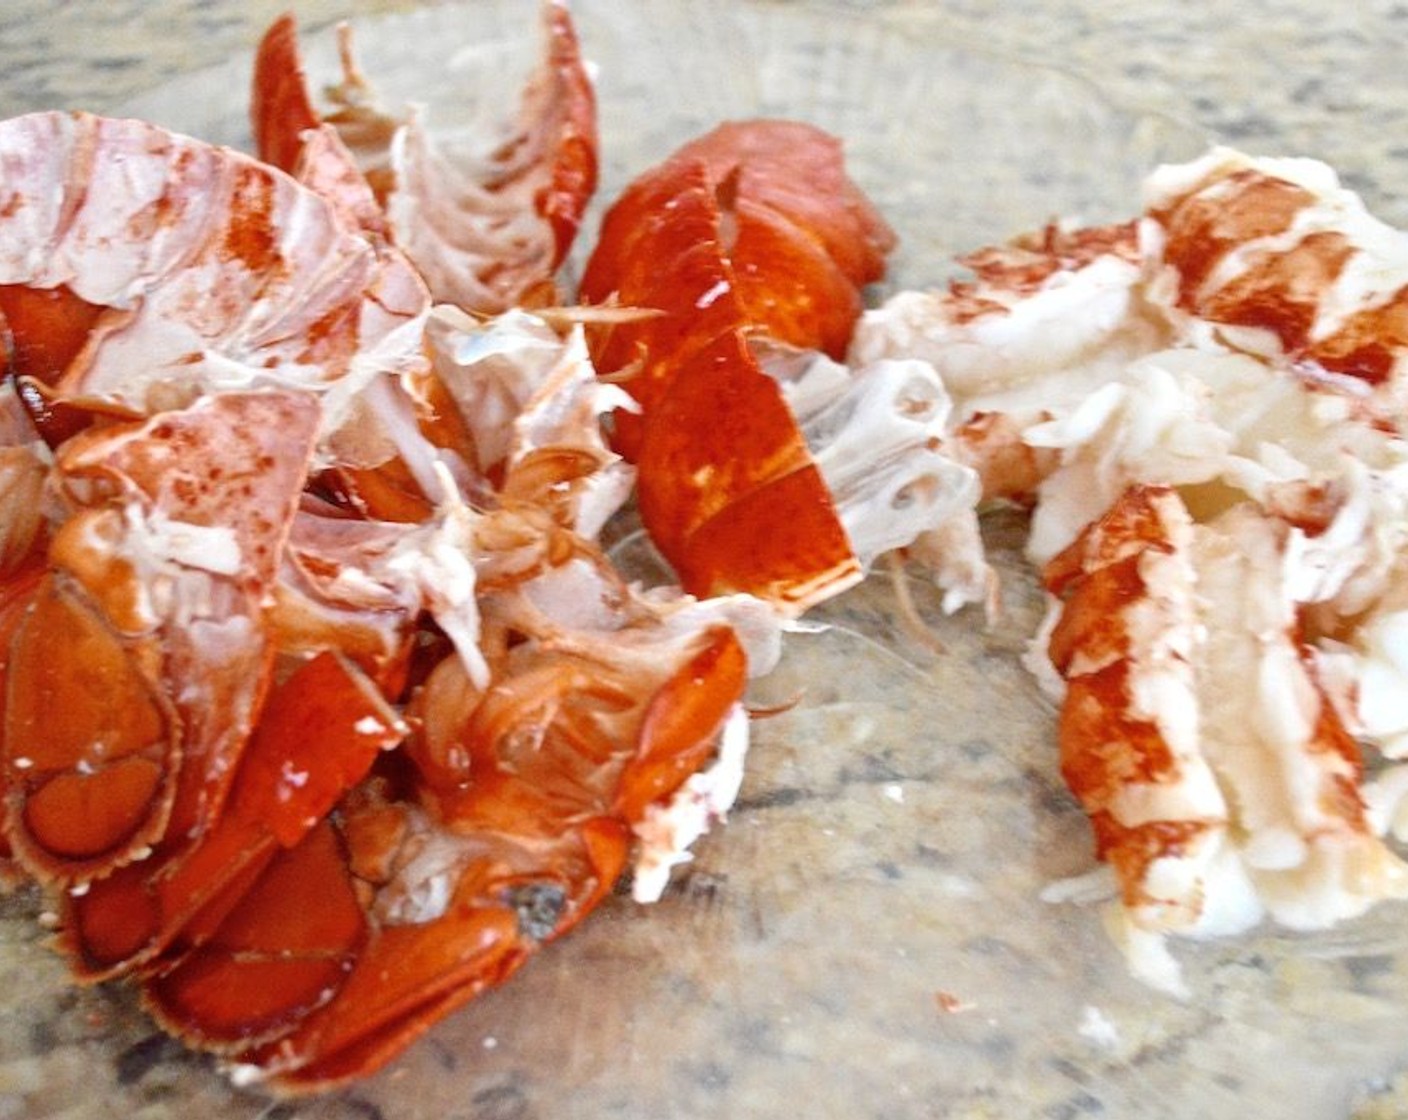 step 2 Pour the salty lobster cooking water into a heat proof bowl or container to reserve it. Then crack the tails open and remove the meat, trying not to break the tails too much into little pieces. Chop up the meat into tiny pieces and store it in the refrigerator while the soup cooks.